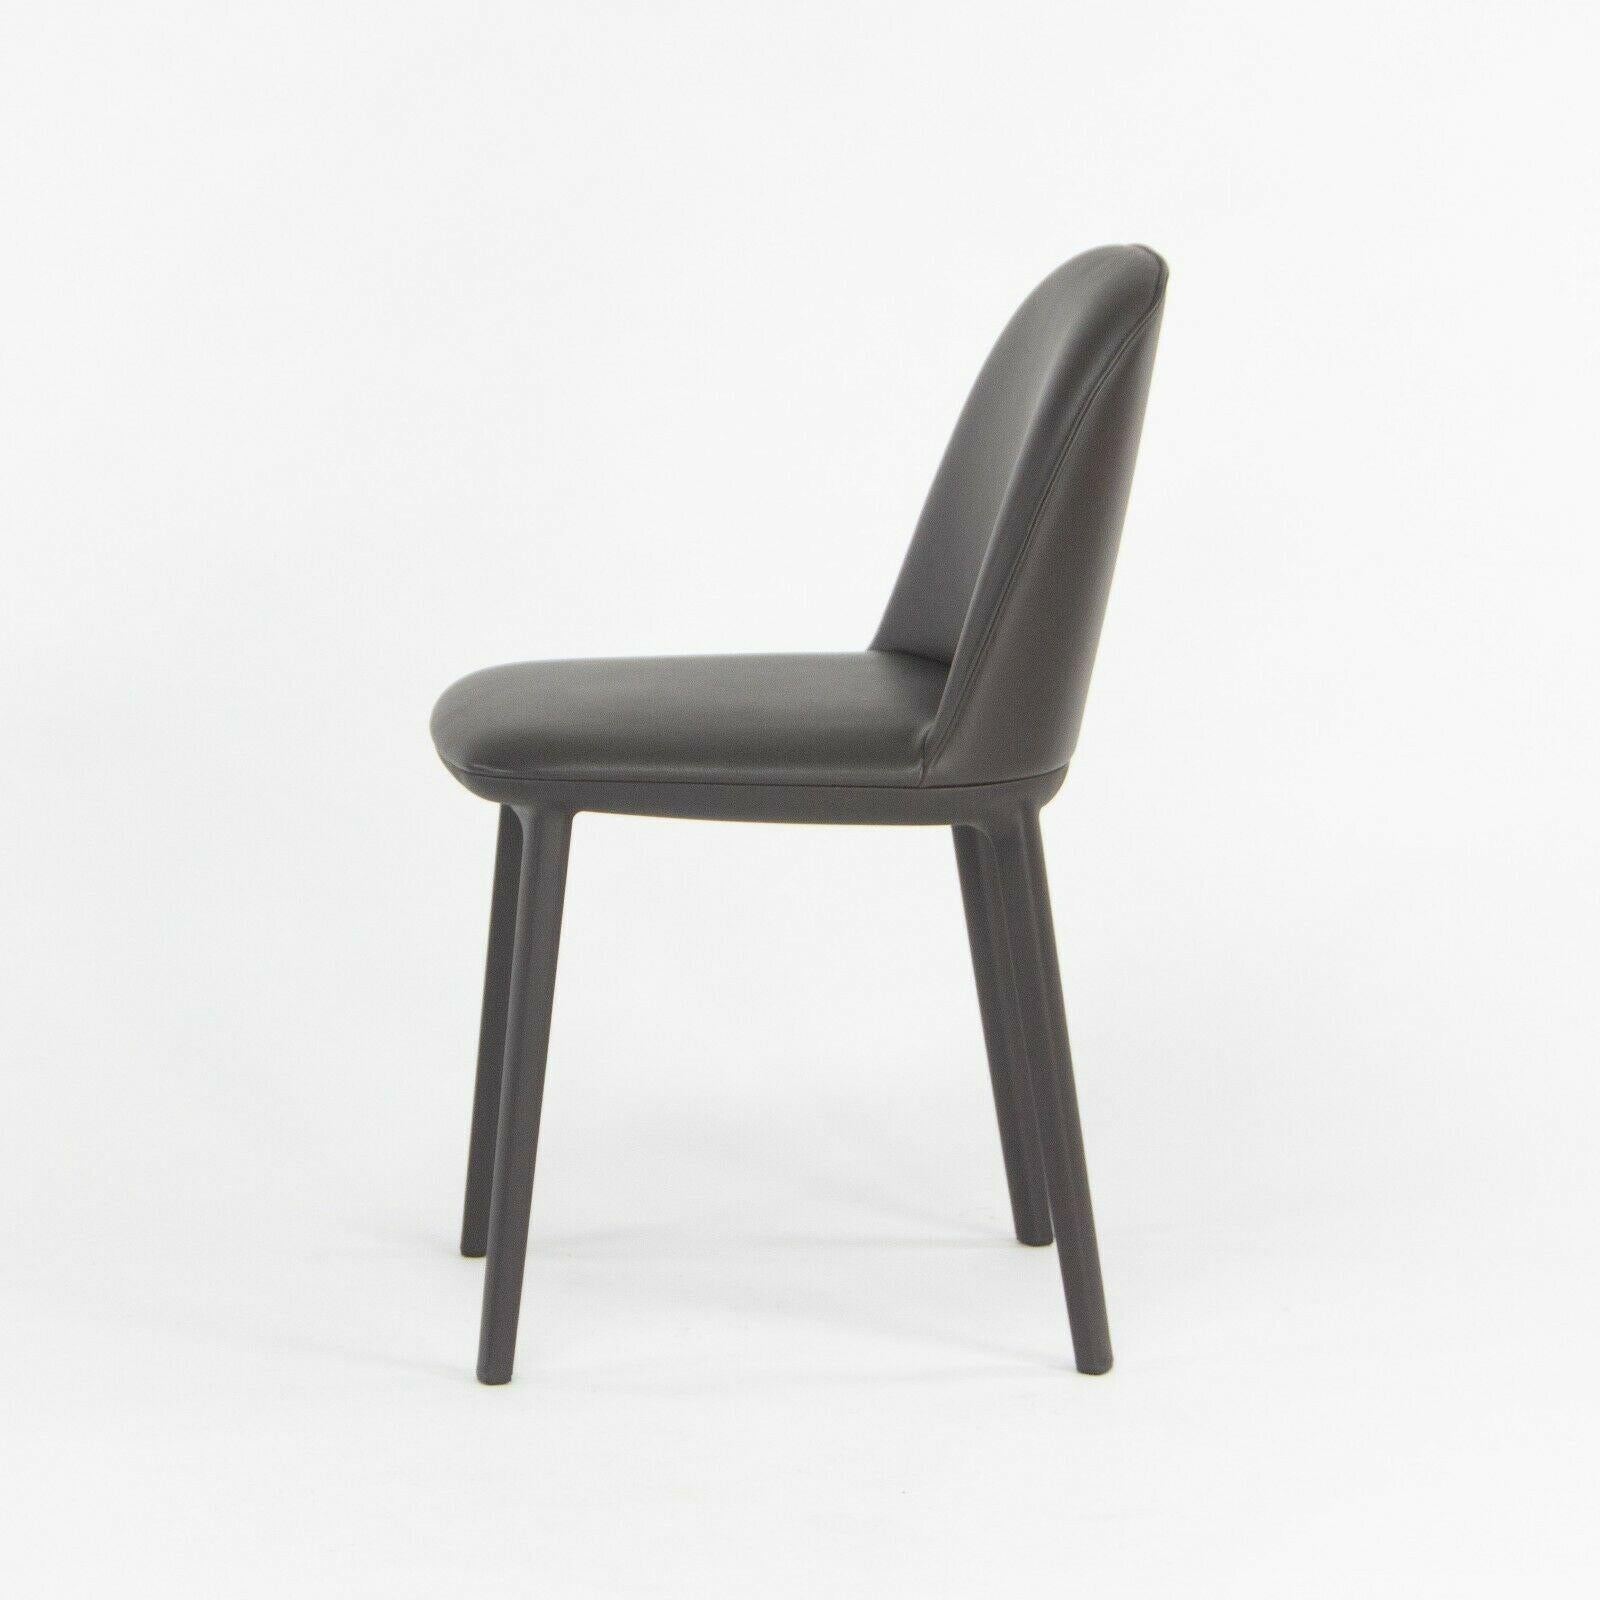 Swiss 2019 Vitra Softshell Side Chair w Dark Brown Leather by Ronan & Erwan Bouroullec For Sale